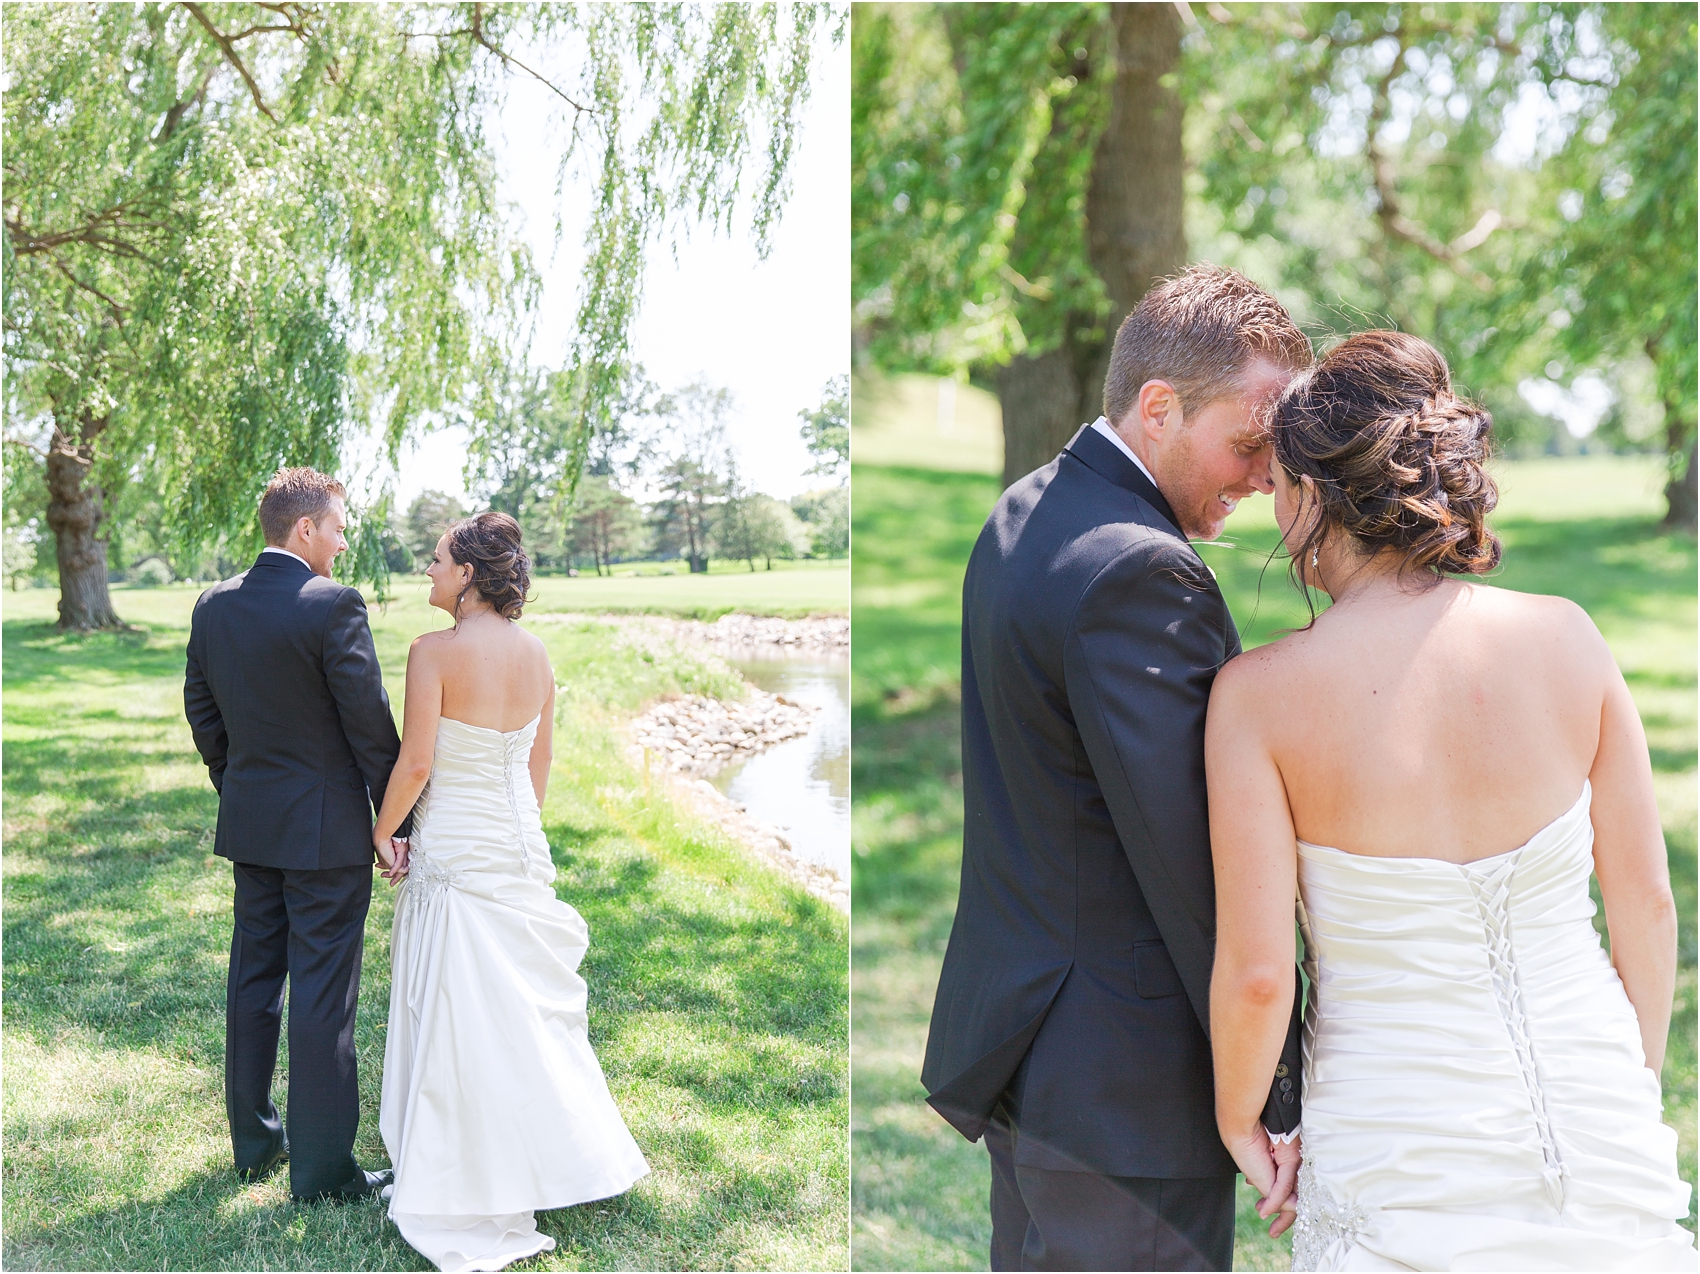 classic-wedding-photos-at-great-oaks-country-club-in-rochester-hills-mi-by-courtney-carolyn-photography_0045.jpg